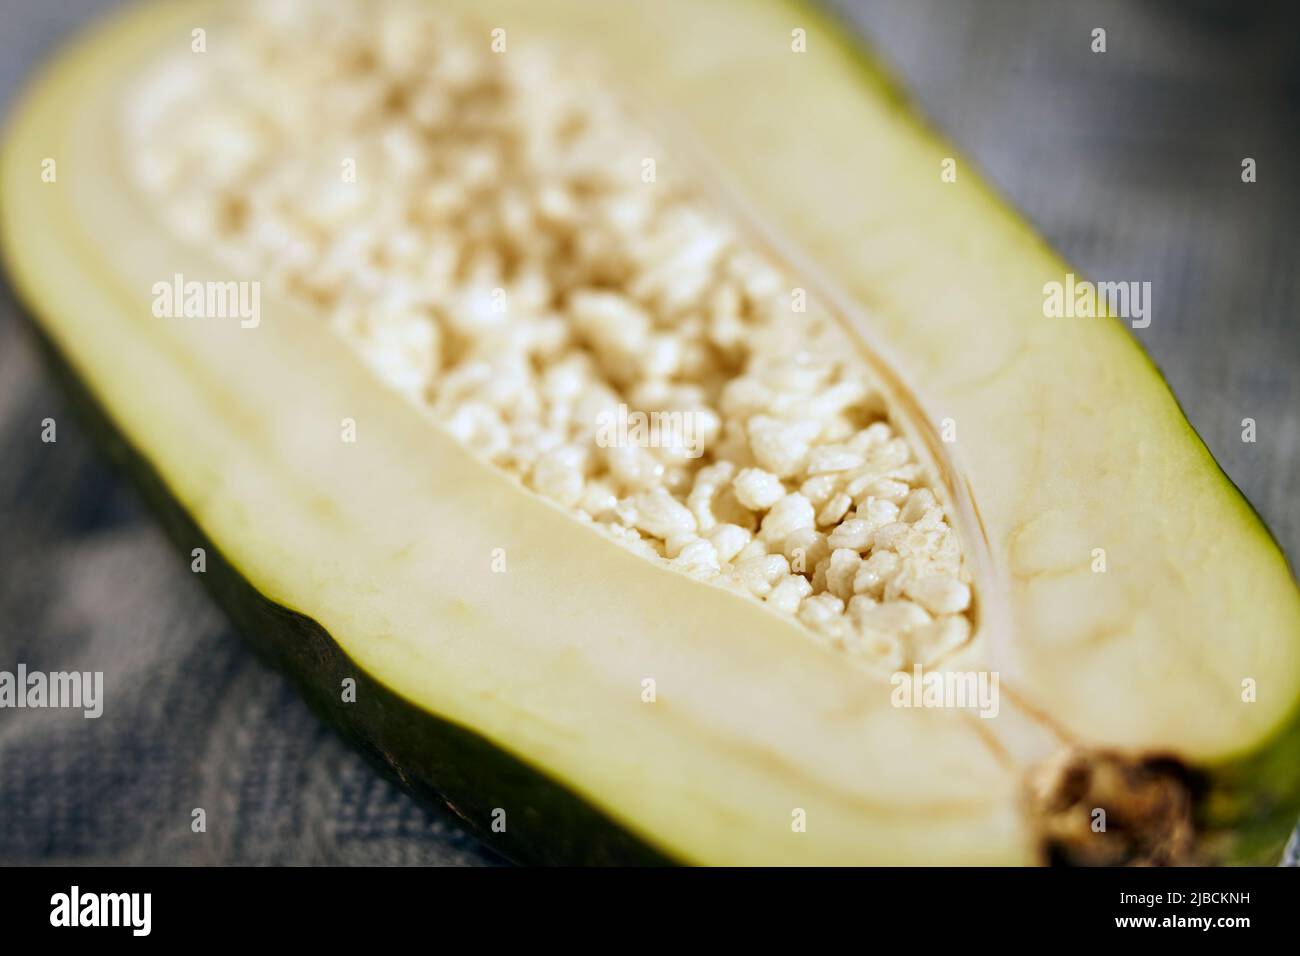 Green papaya sliced in half showing the seeds Stock Photo